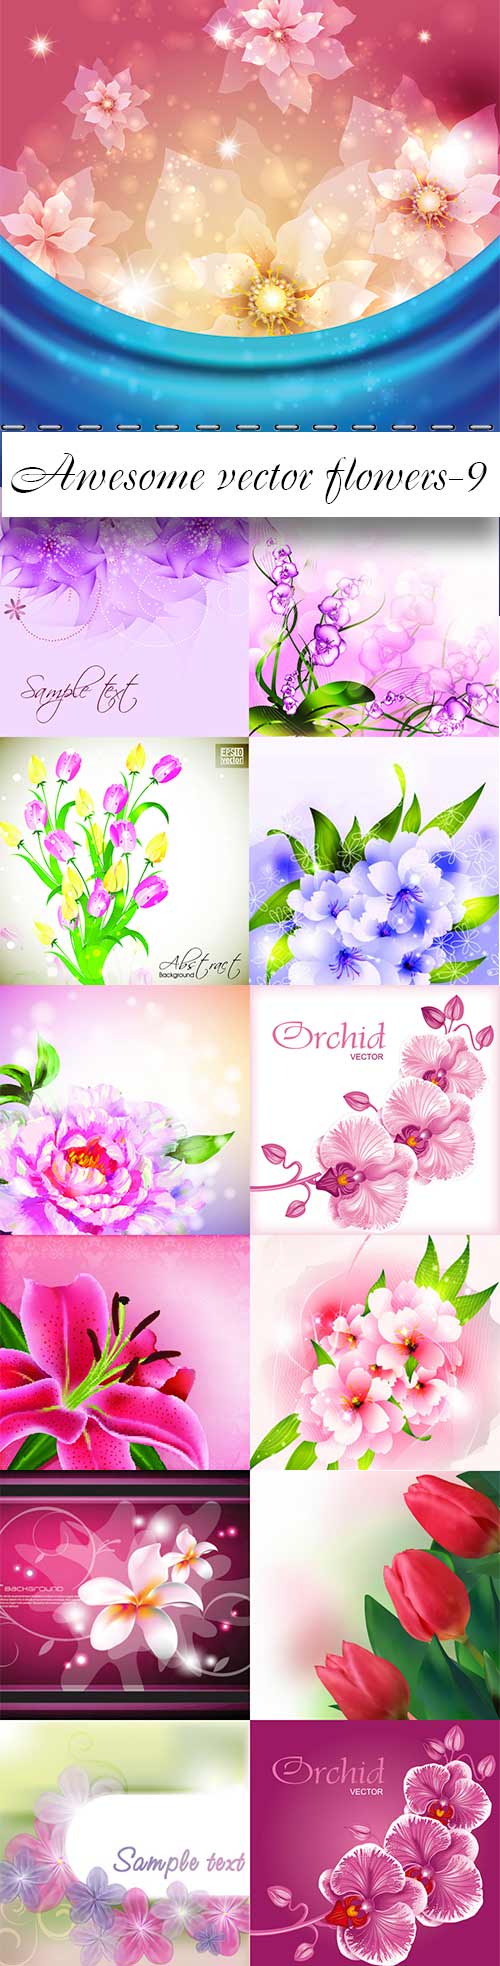 Awesome vector flowers-9